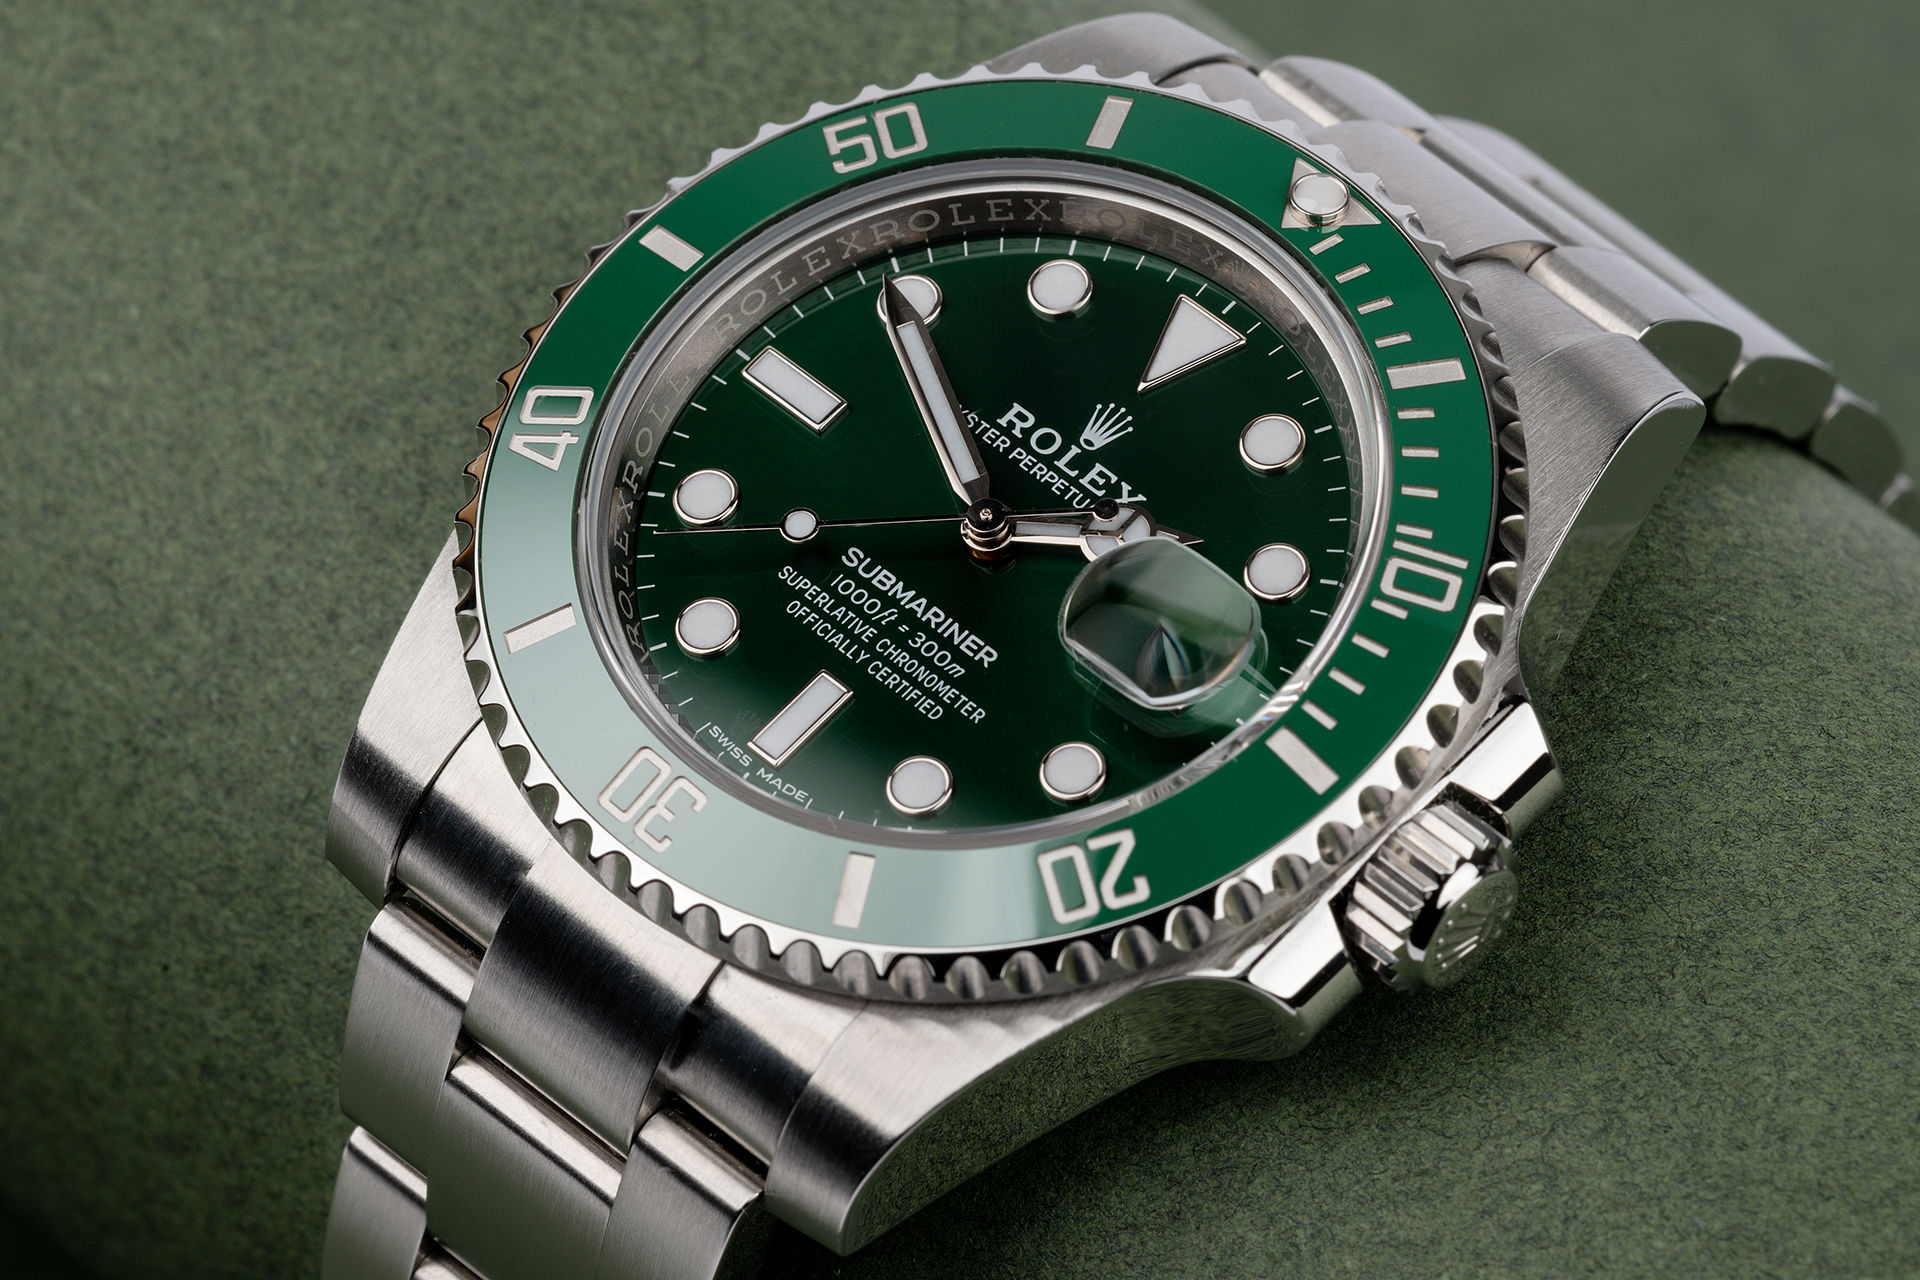 Rolex Submariner Date Watches | ref 116610LV | Box & Certificate | The ...